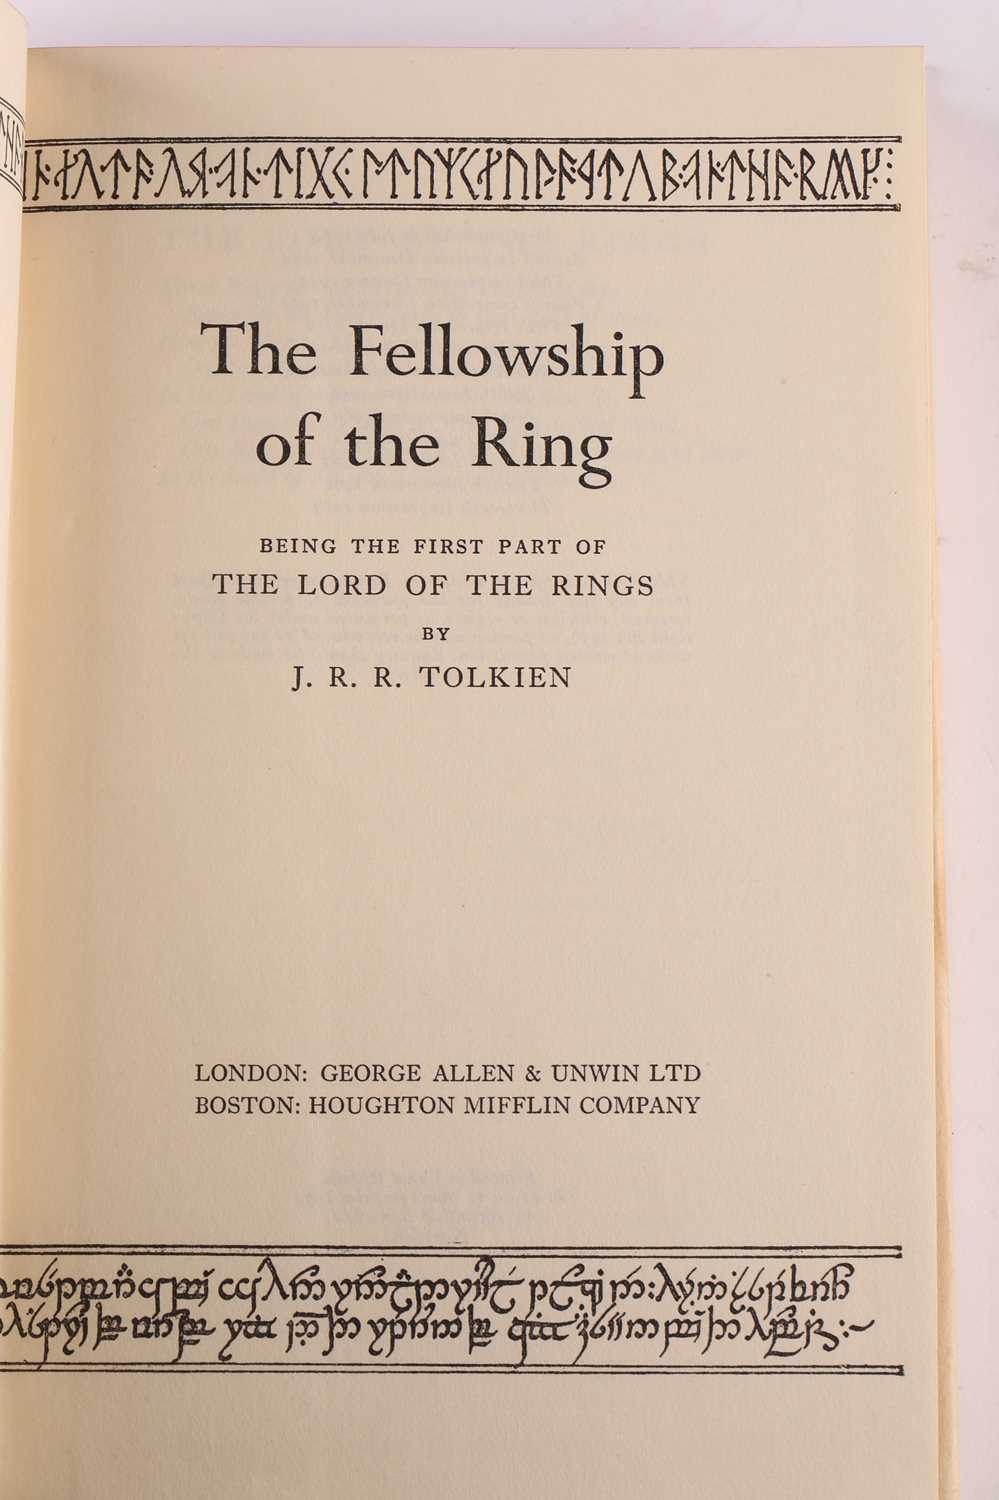 Tolkien (J.R.R.) The Lord of the Rings, 3 volumes in a slip case, George Allen & Unwin Ltd, 'The - Image 12 of 17